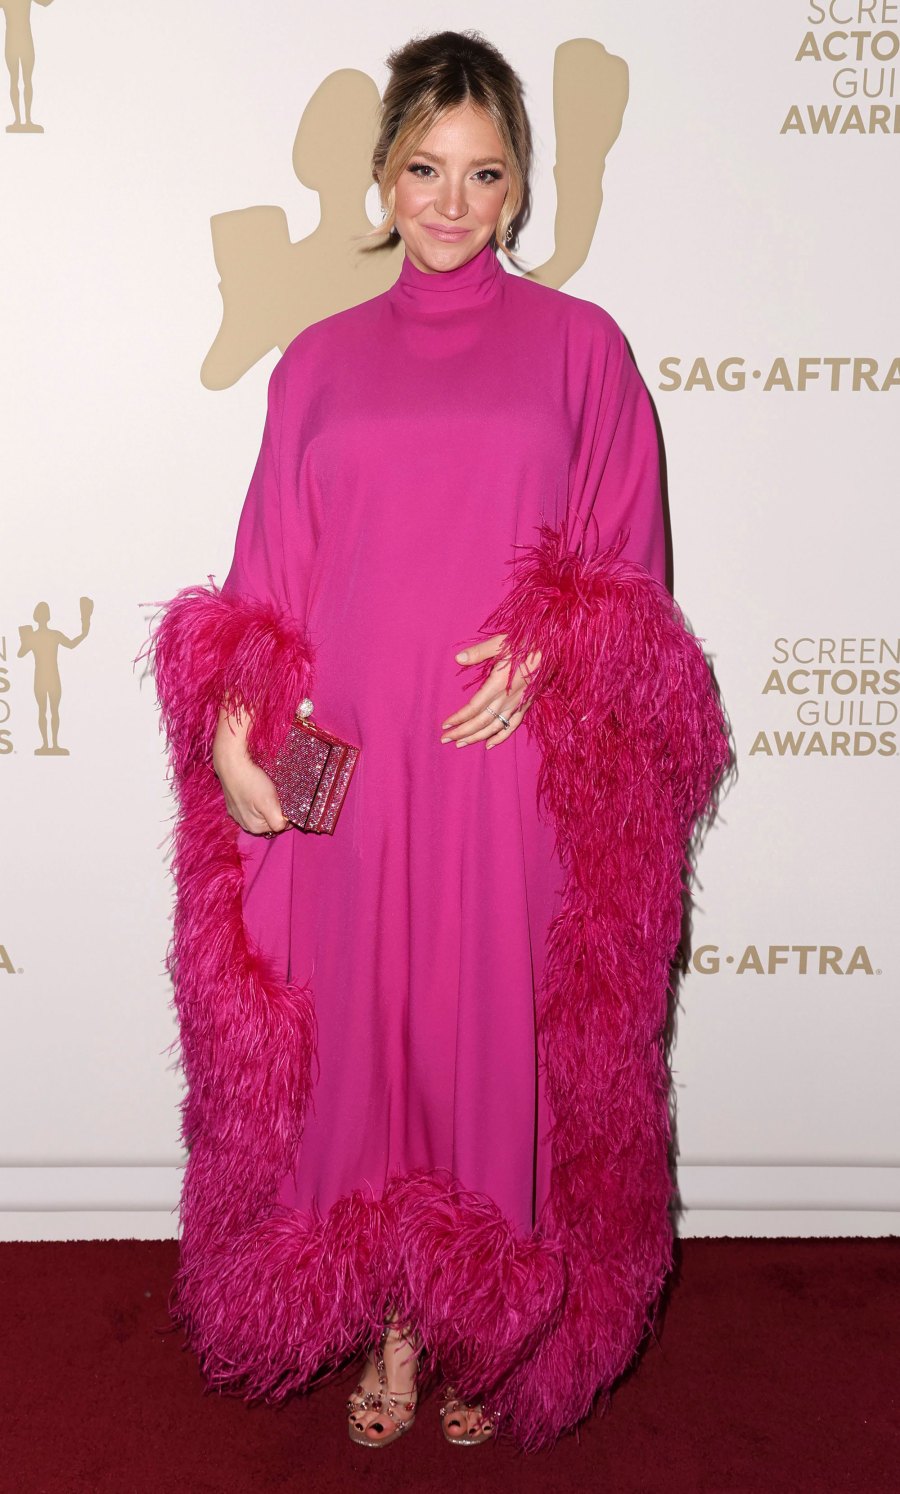 SAG Awards 2023 Pregnant Stars Show Baby Bumps at SAG Awards: Natalie Portman, Busy Philipps and More pink gown